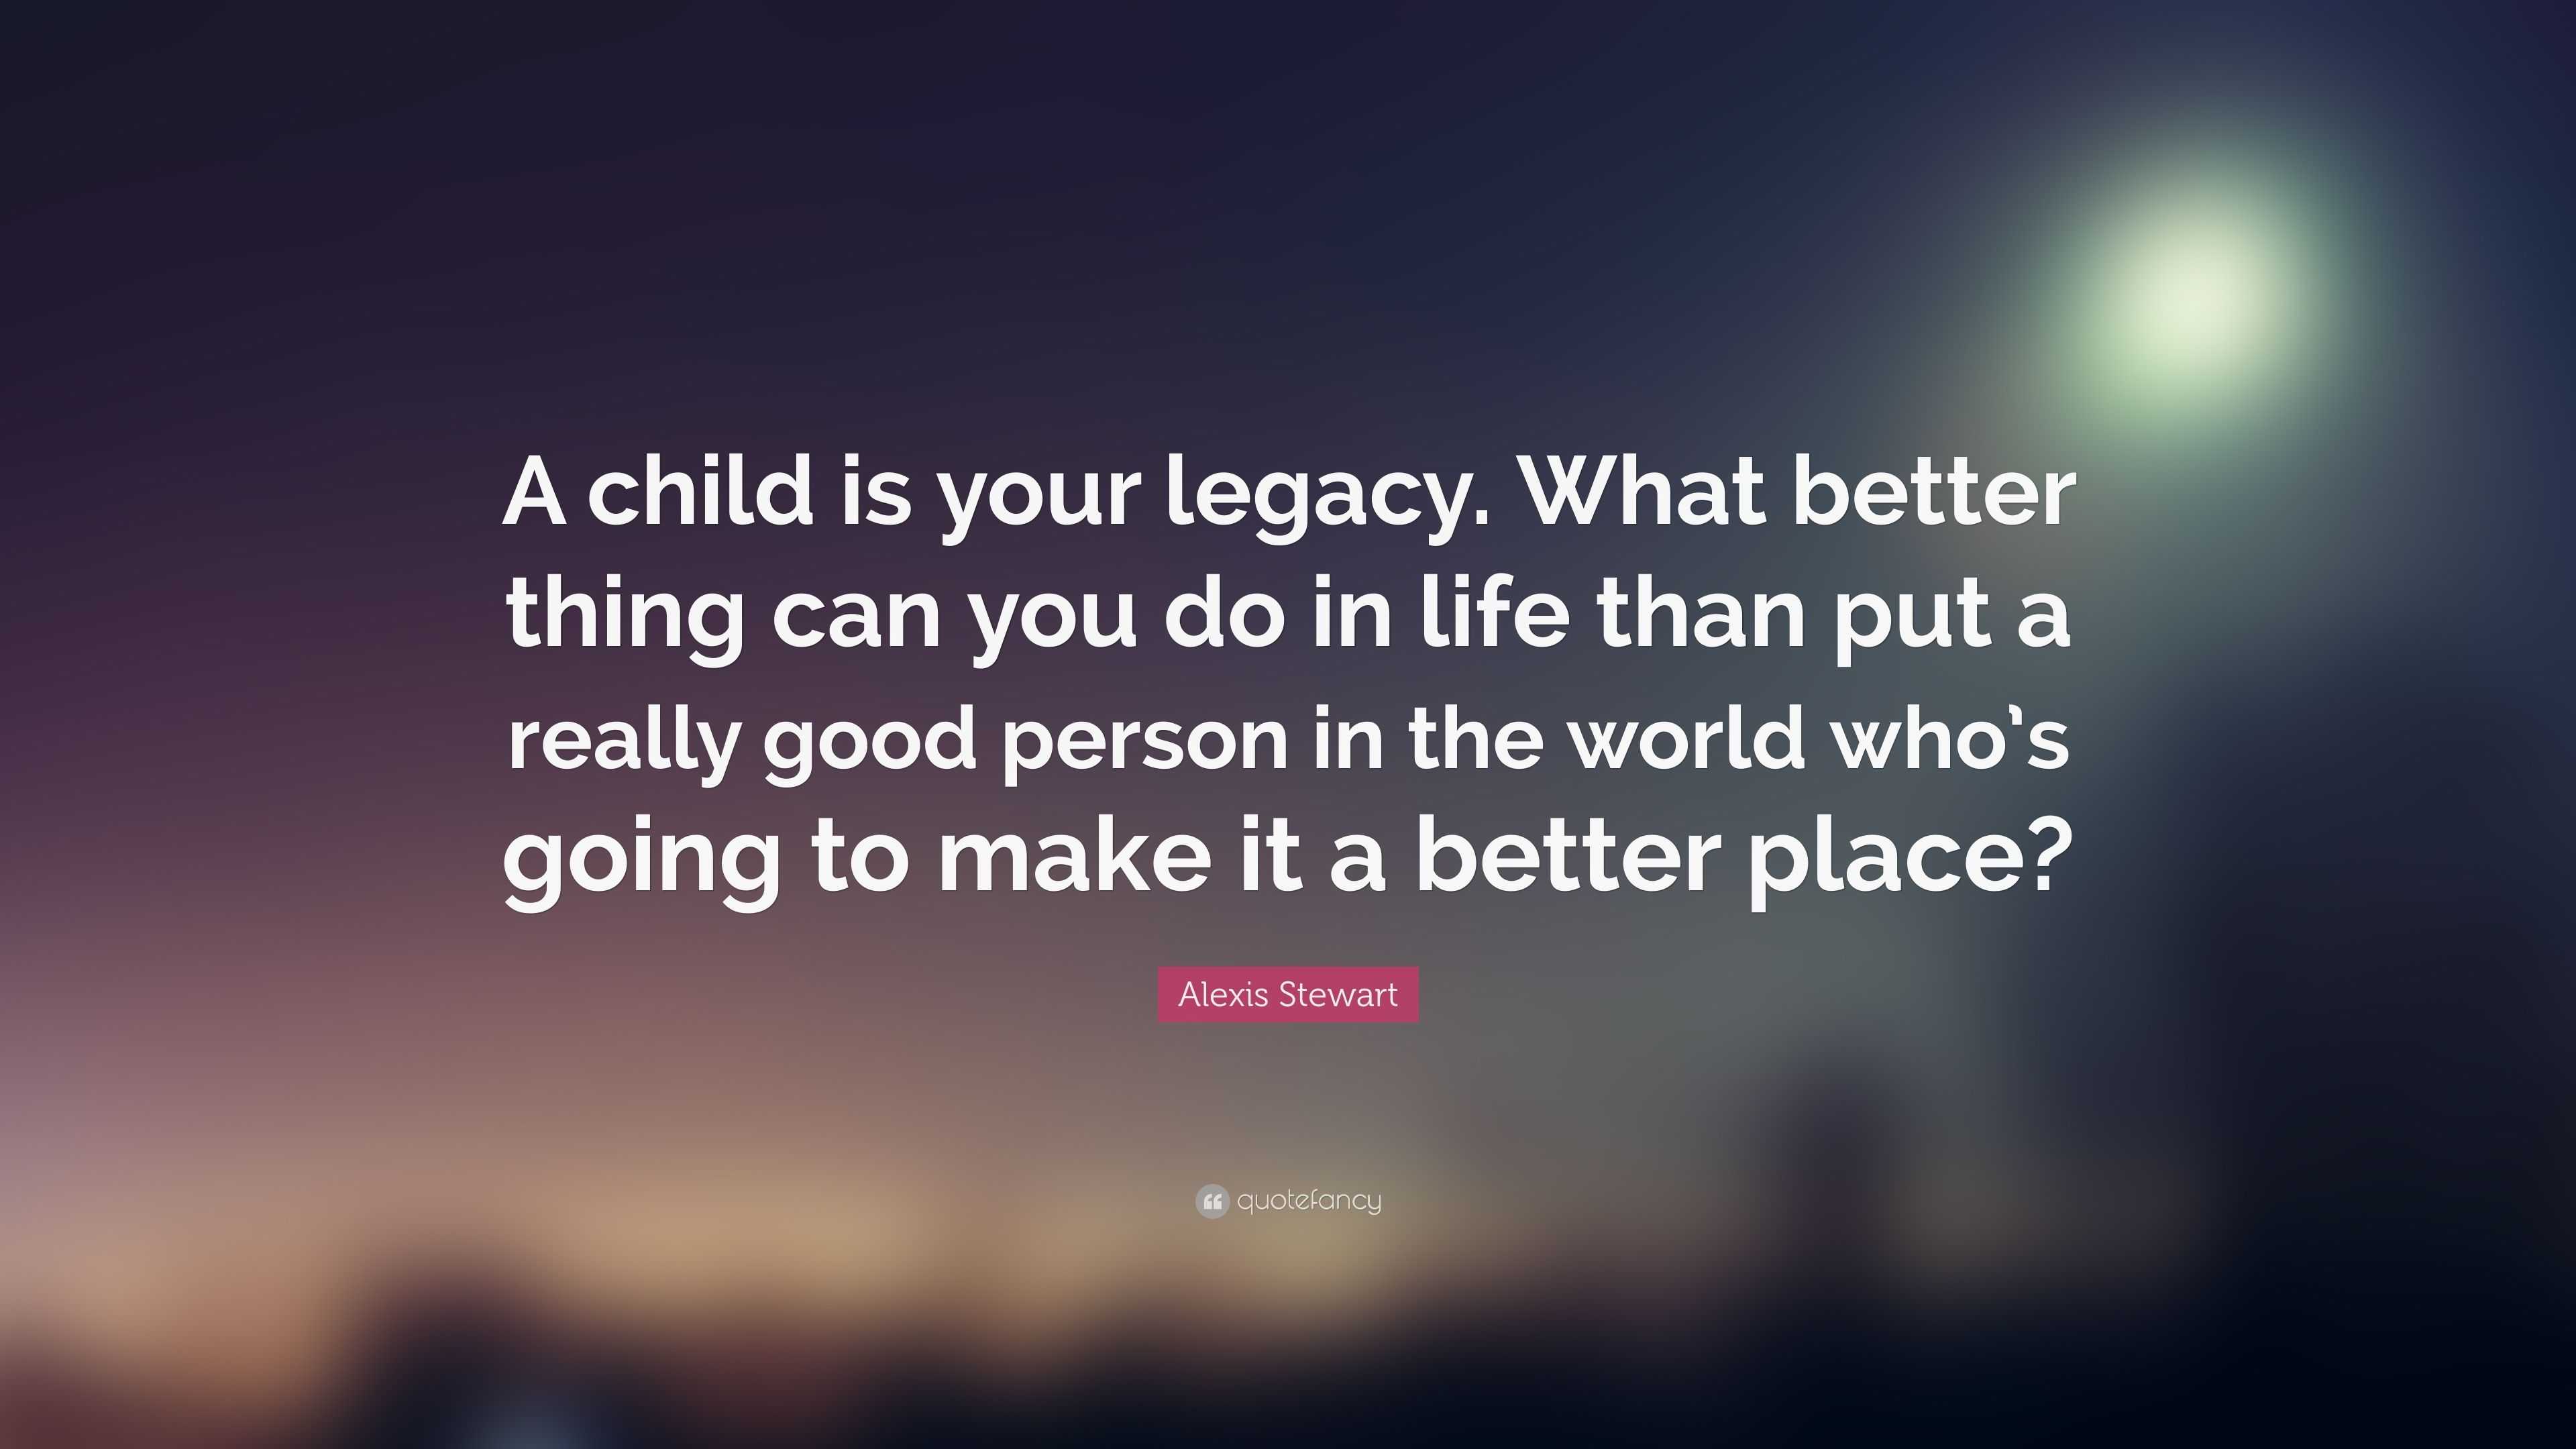 Alexis Stewart Quote “A child is your legacy What better thing can you